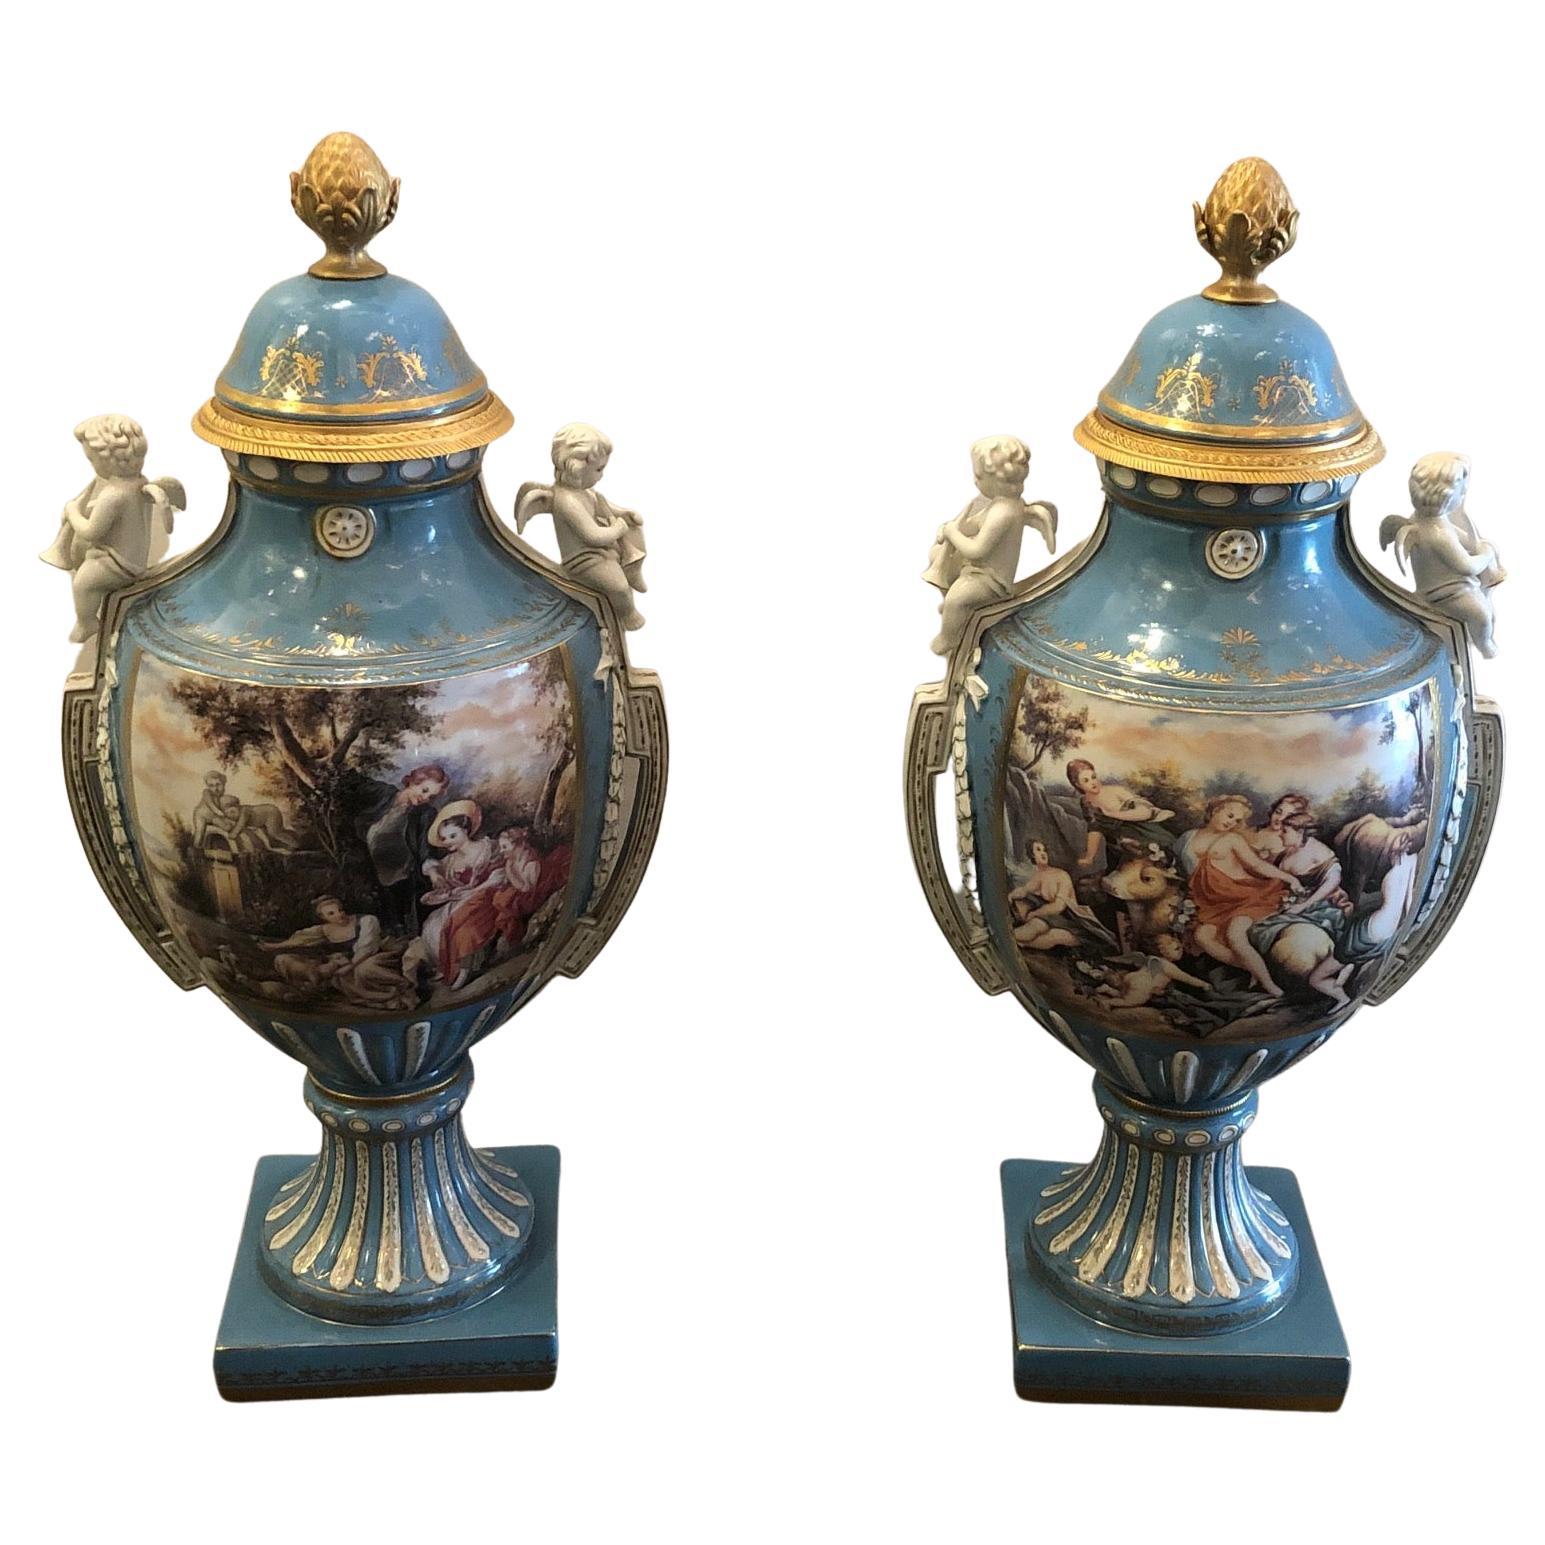 French Sevres Style Cover Porcelain Urns